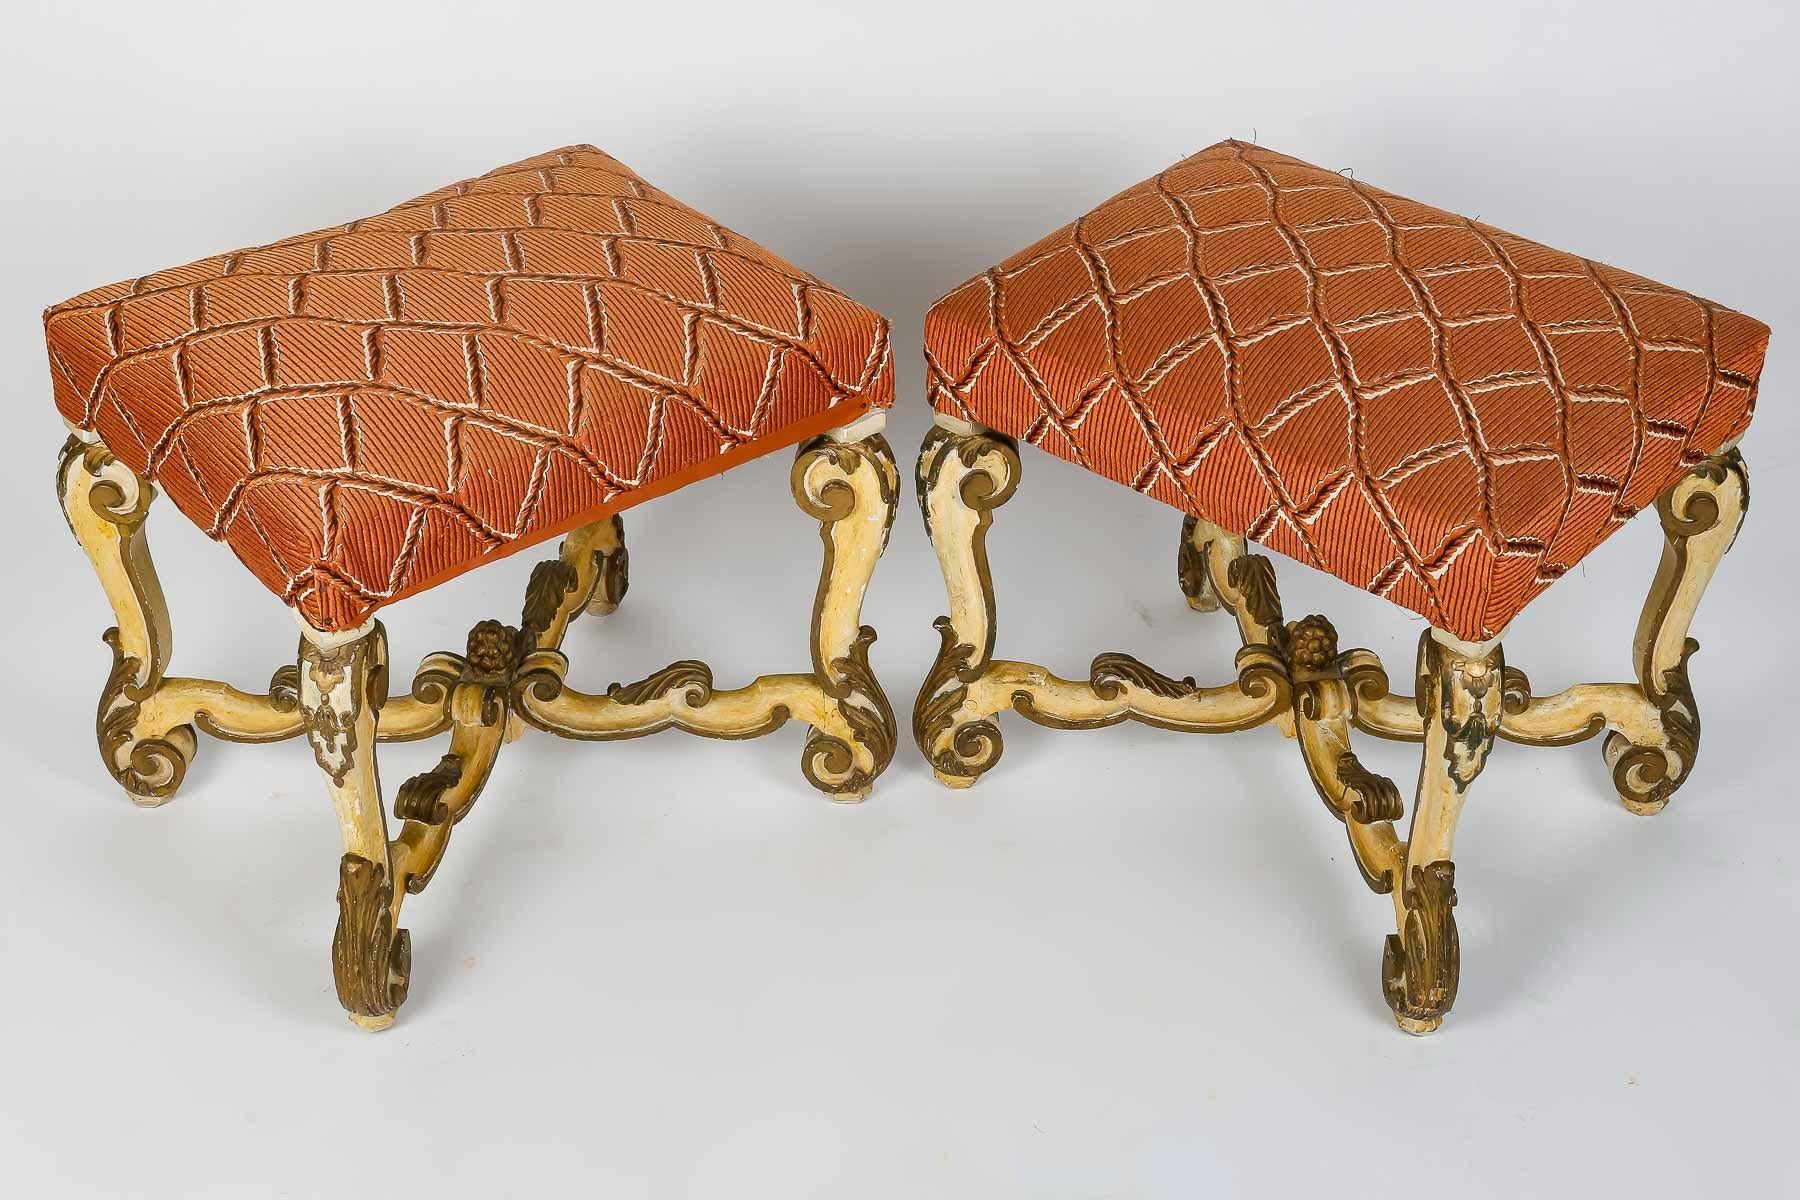 A 19th Century Pair of Italians Baroque Style Stools
A gilt and lacquered wood pair of stools
The padded seat upholstered, above double 'C' scrolls and shell carved legs joined by a scrolling 'X' from stretcher with a pinecone finial, on shell